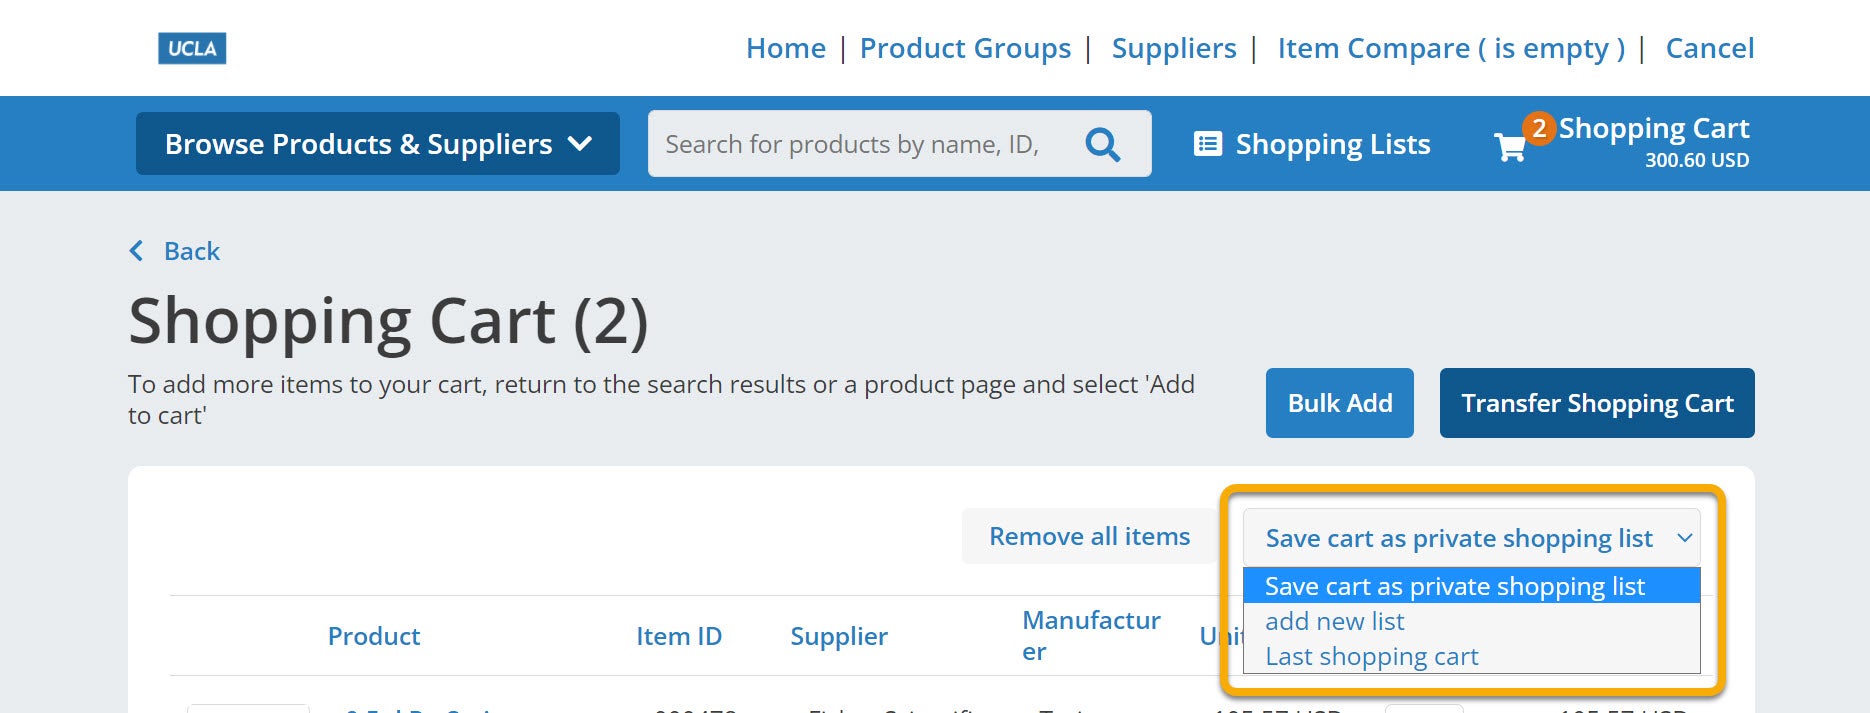 Select the Add New List option from the Save Cart as Private Shopping List dropdown in the top right. 